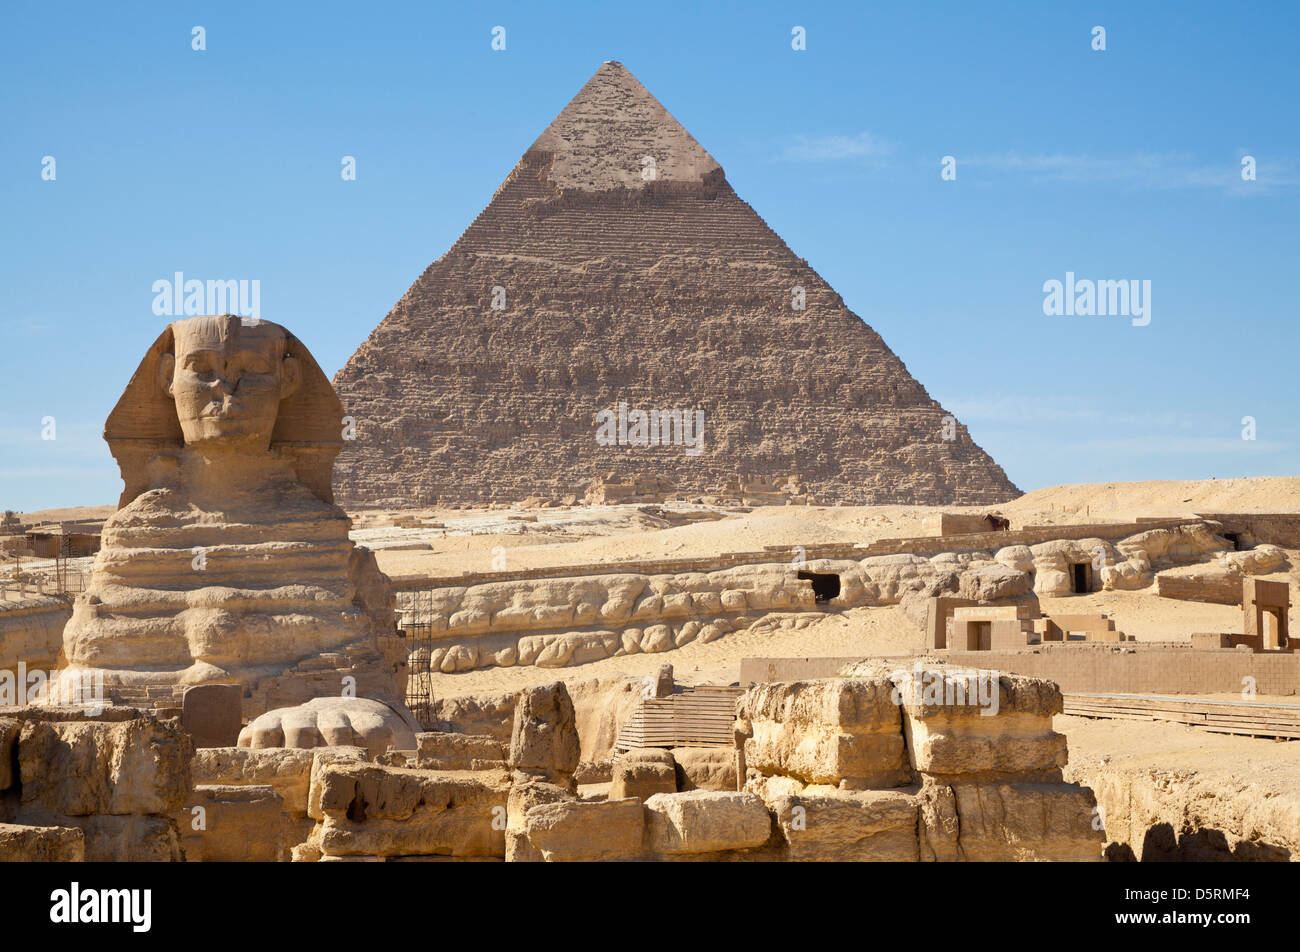 The Great Sphinx with the Pyramid of Khafre behind at Giza in Egypt Stock Photo